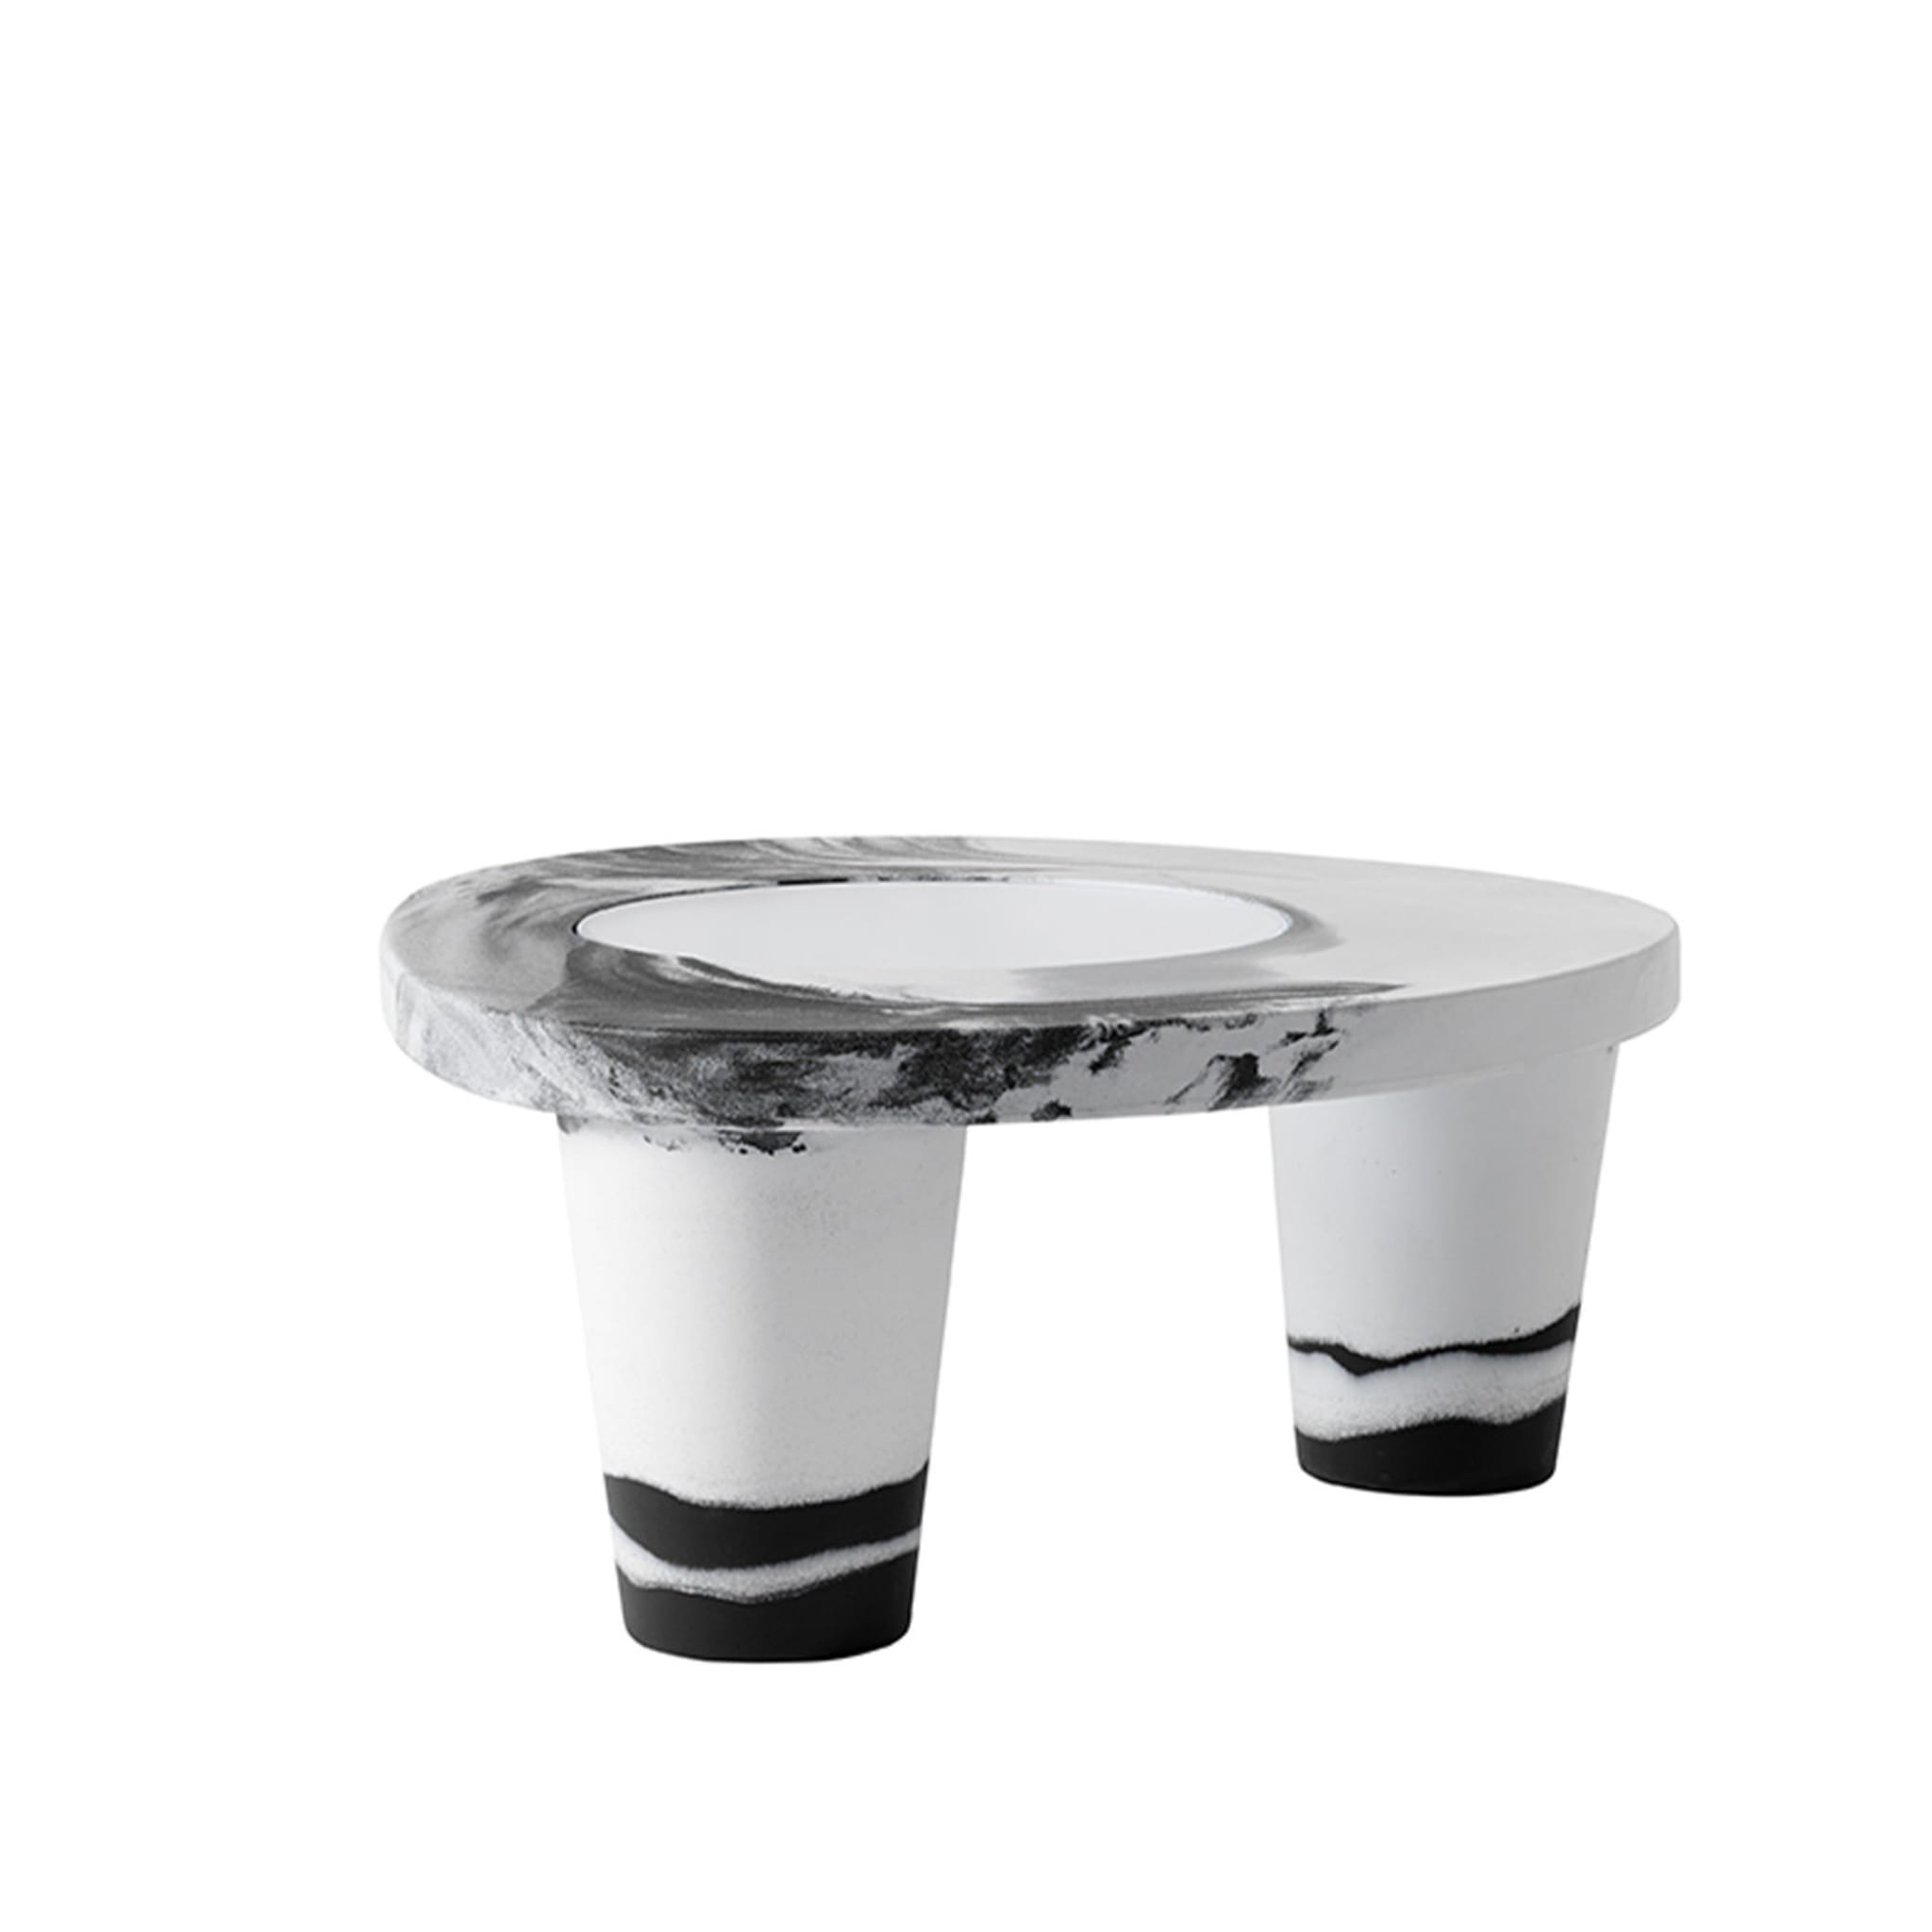 Low Lita Table 10th Anniversary by Paola Navone - Alternative view 2